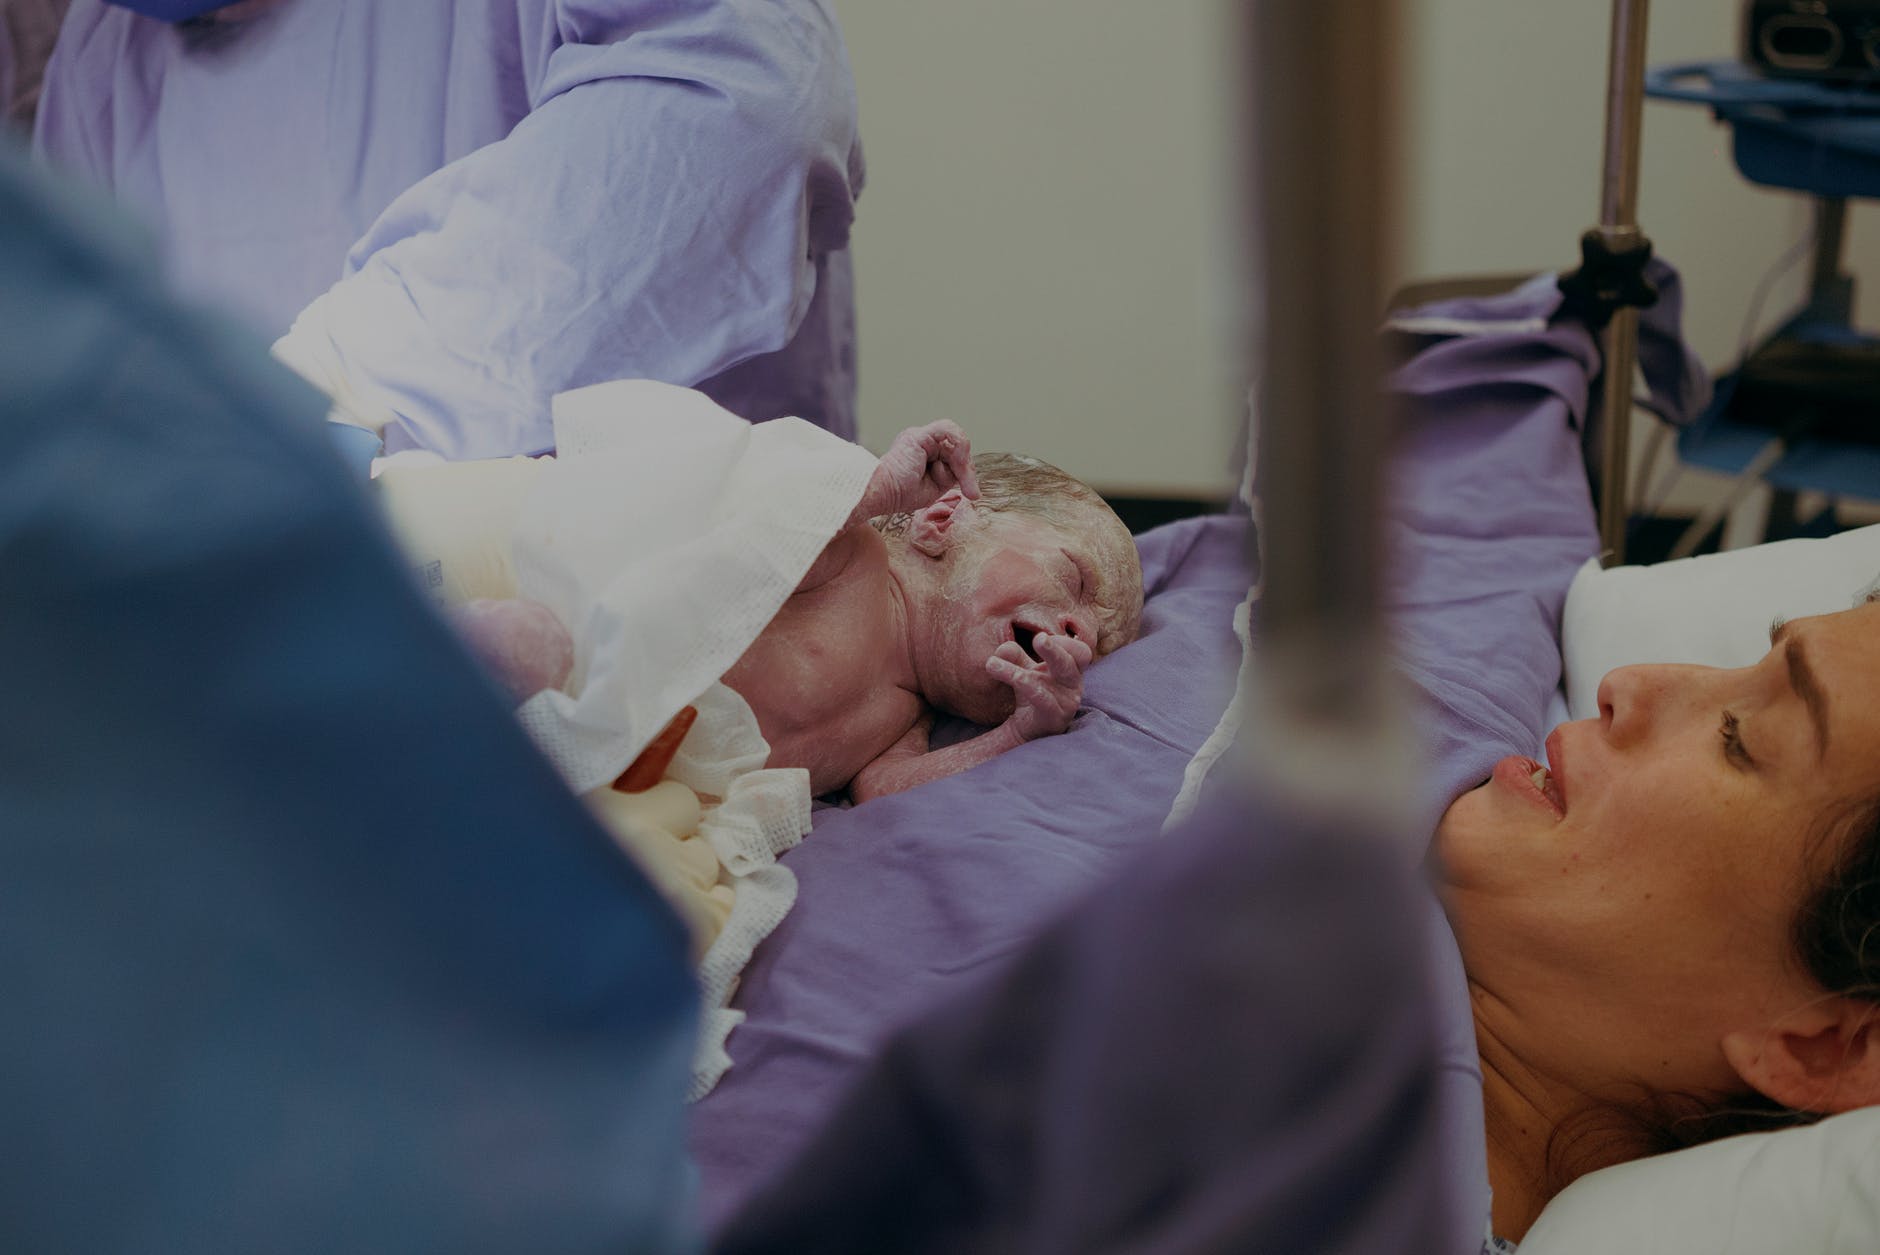 mother and newborn baby in hospital just after labor